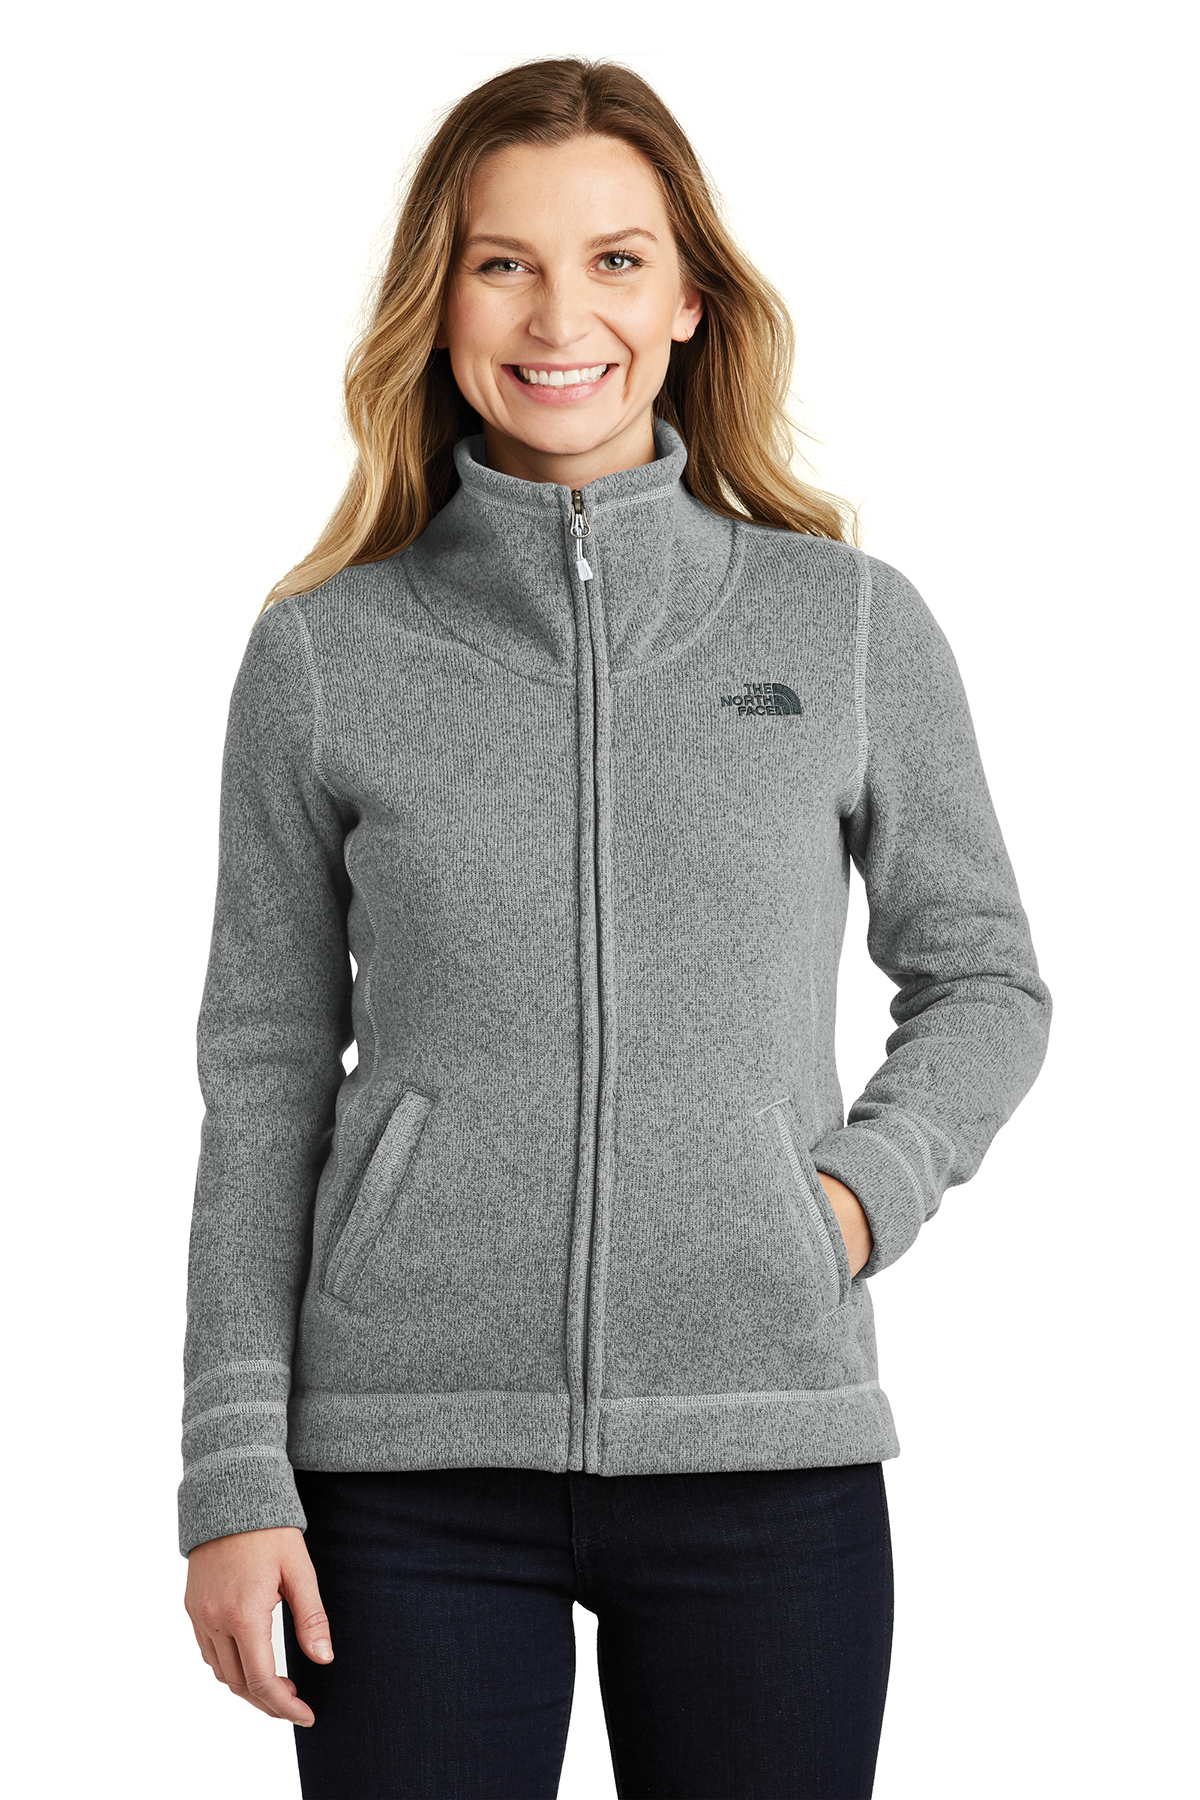 The North Face ® Ladies Sweater Fleece Jacket | Product | SanMar